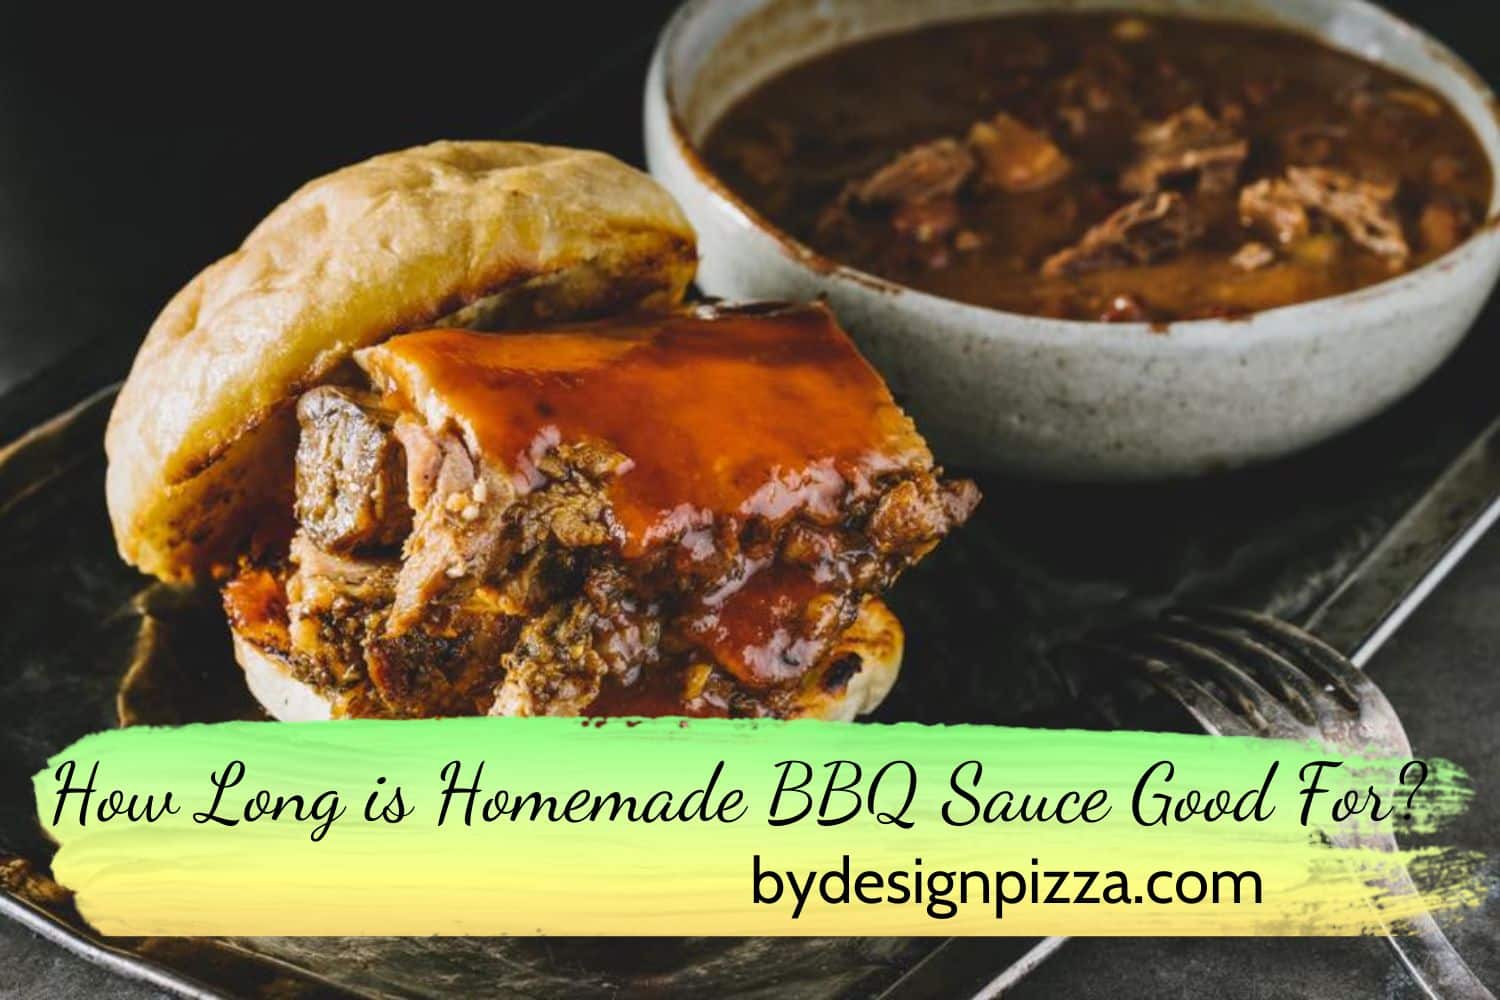 How Long is Homemade BBQ Sauce Good For